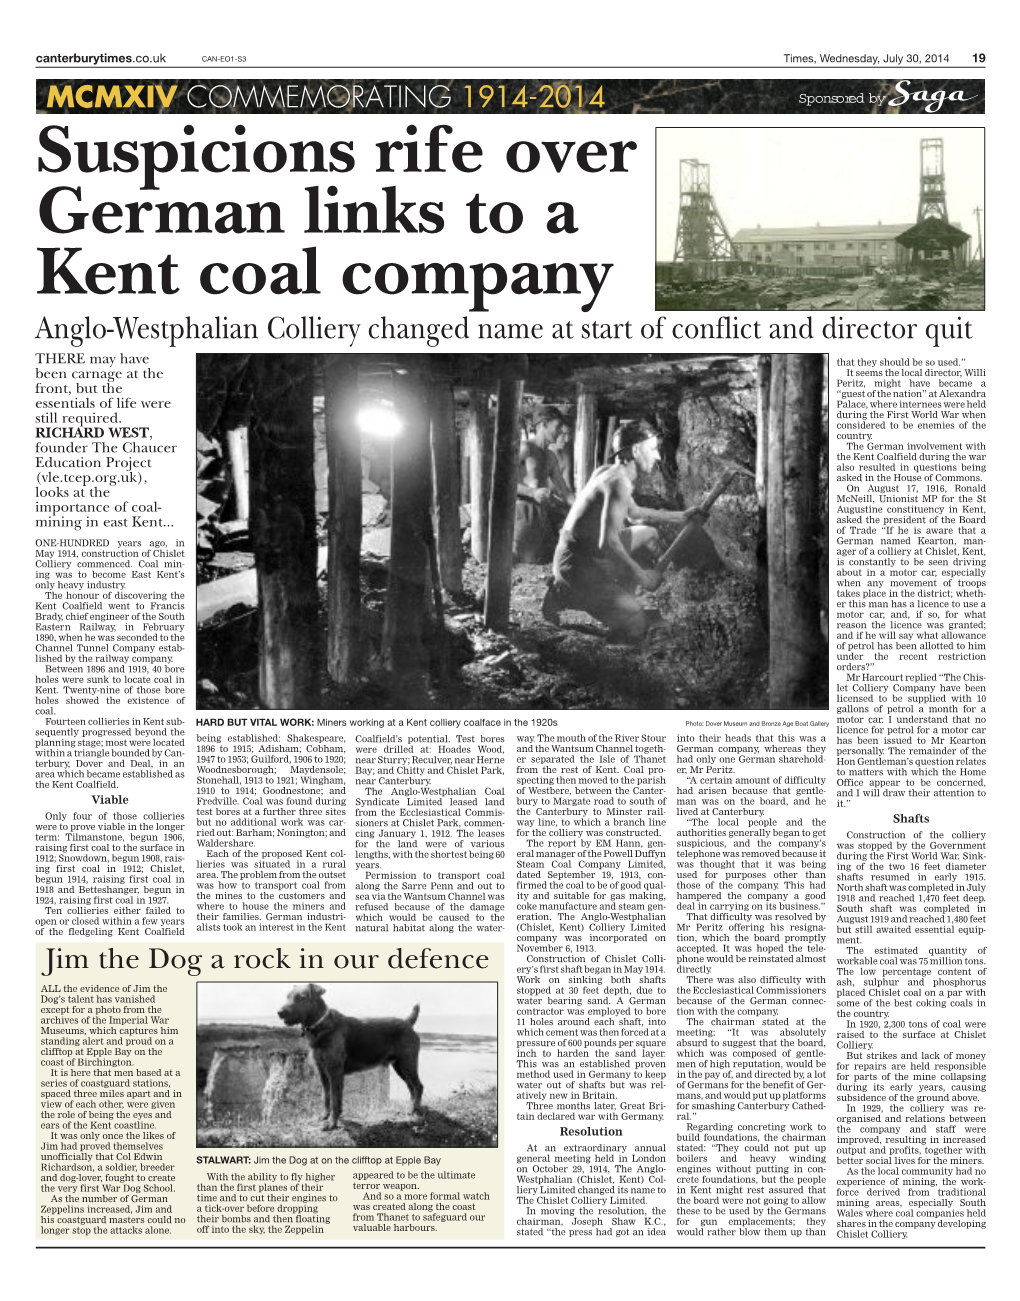 Suspicions Rife Over German Links to a Kent Coal Company Anglo-Westphalian Colliery Changed Name at Start of Conflict and Director Quit